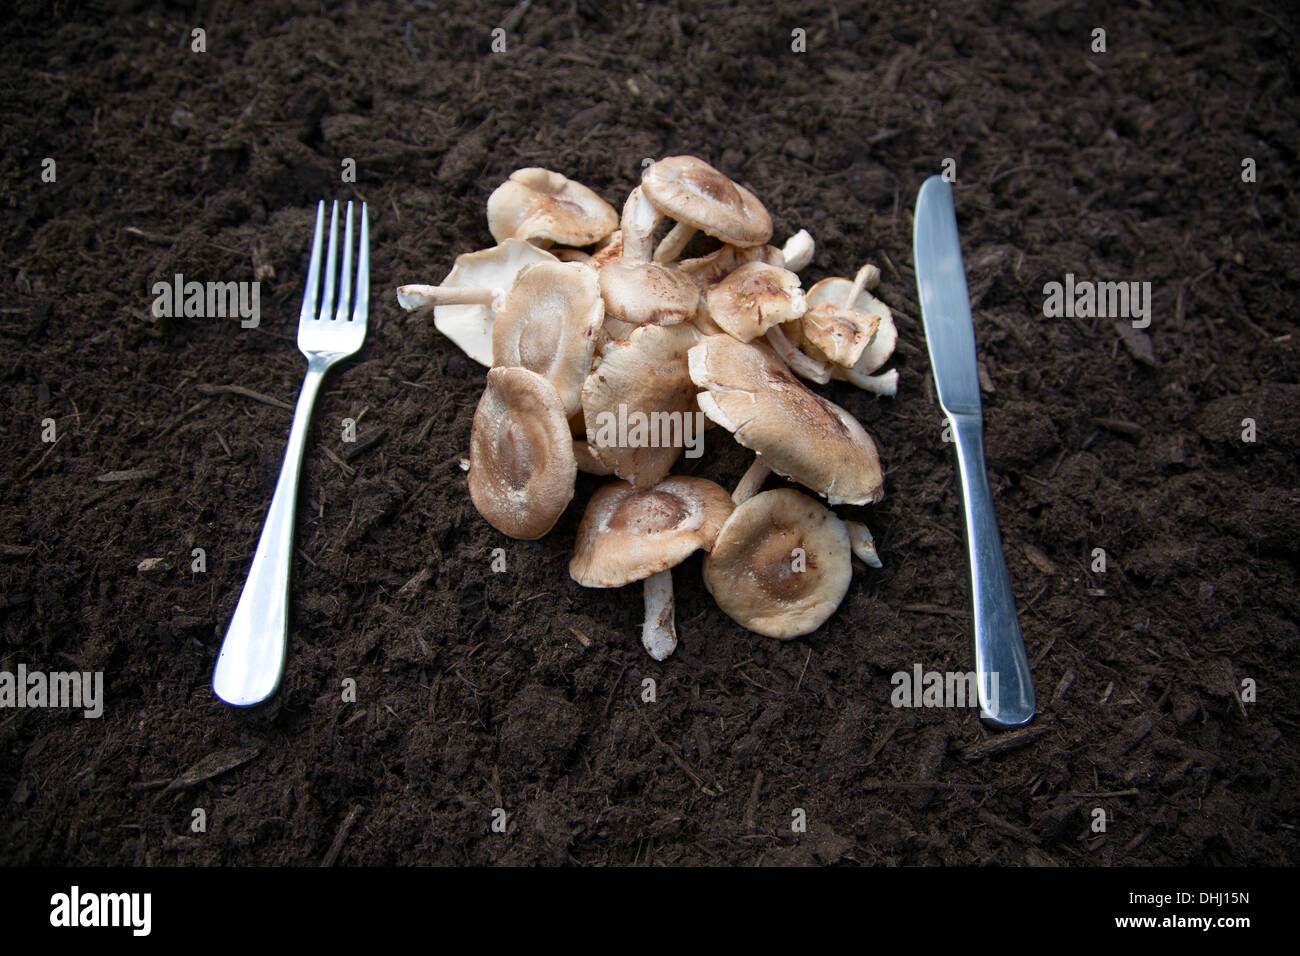 Knife and fork with mushrooms laid on soil Stock Photo